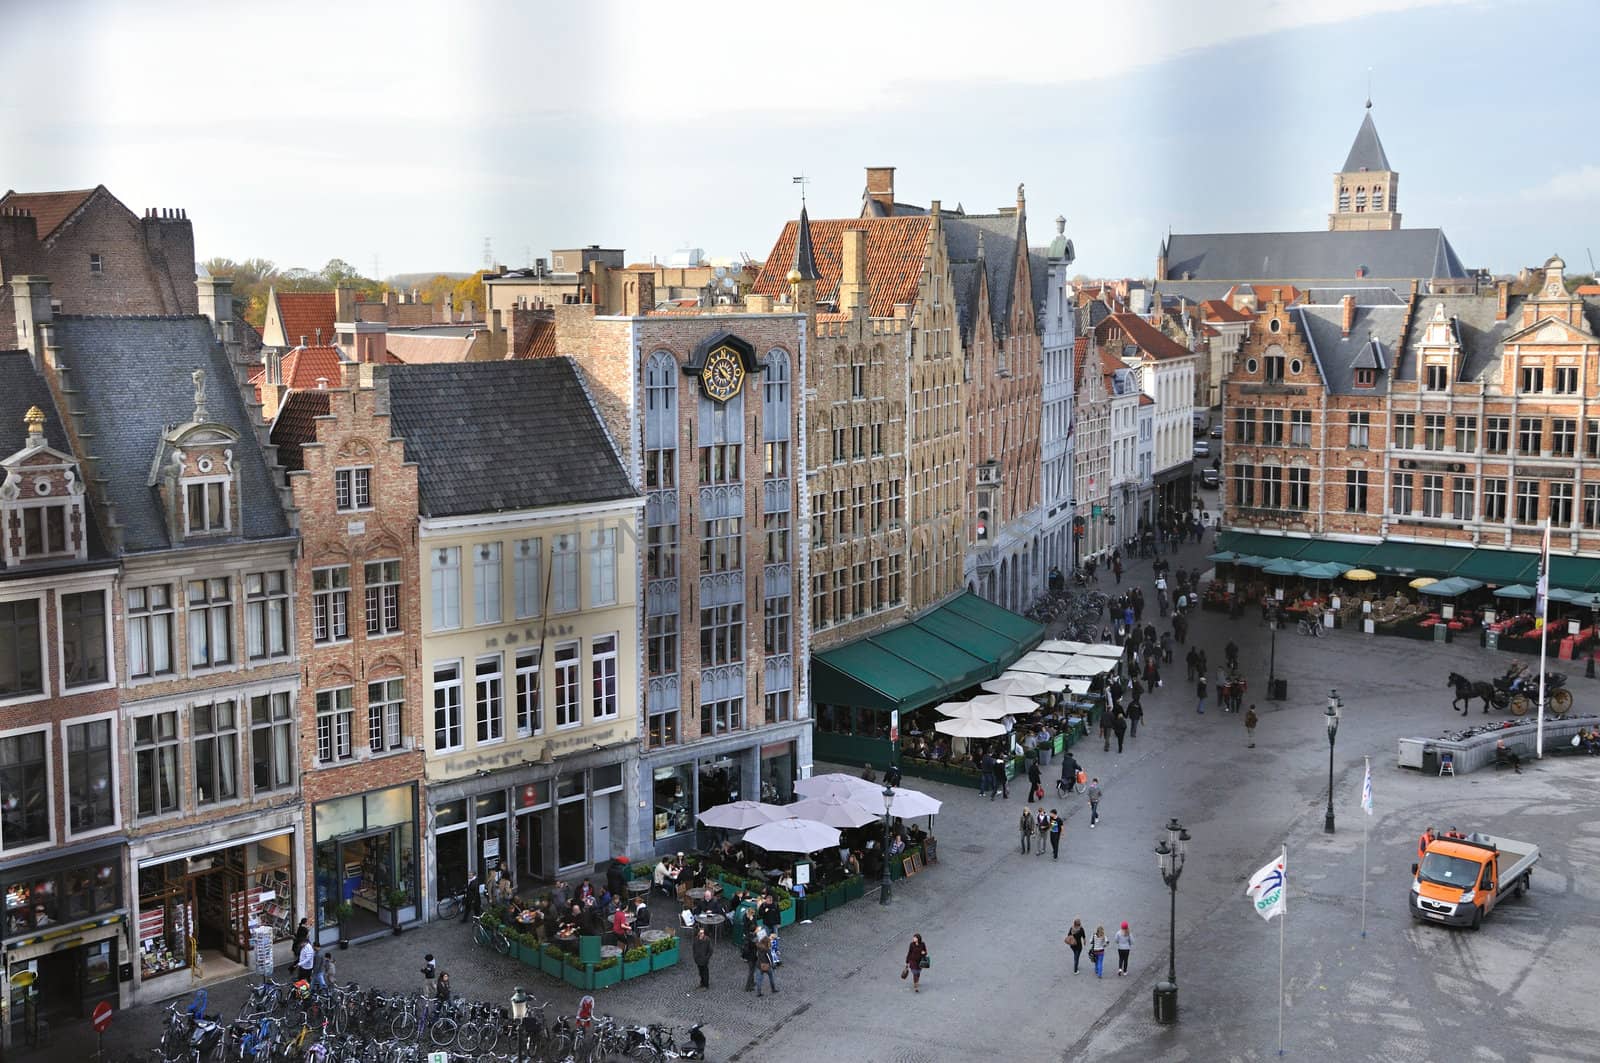 Birds eye view of the main square Brugge (Belgium), taken from the city tower.